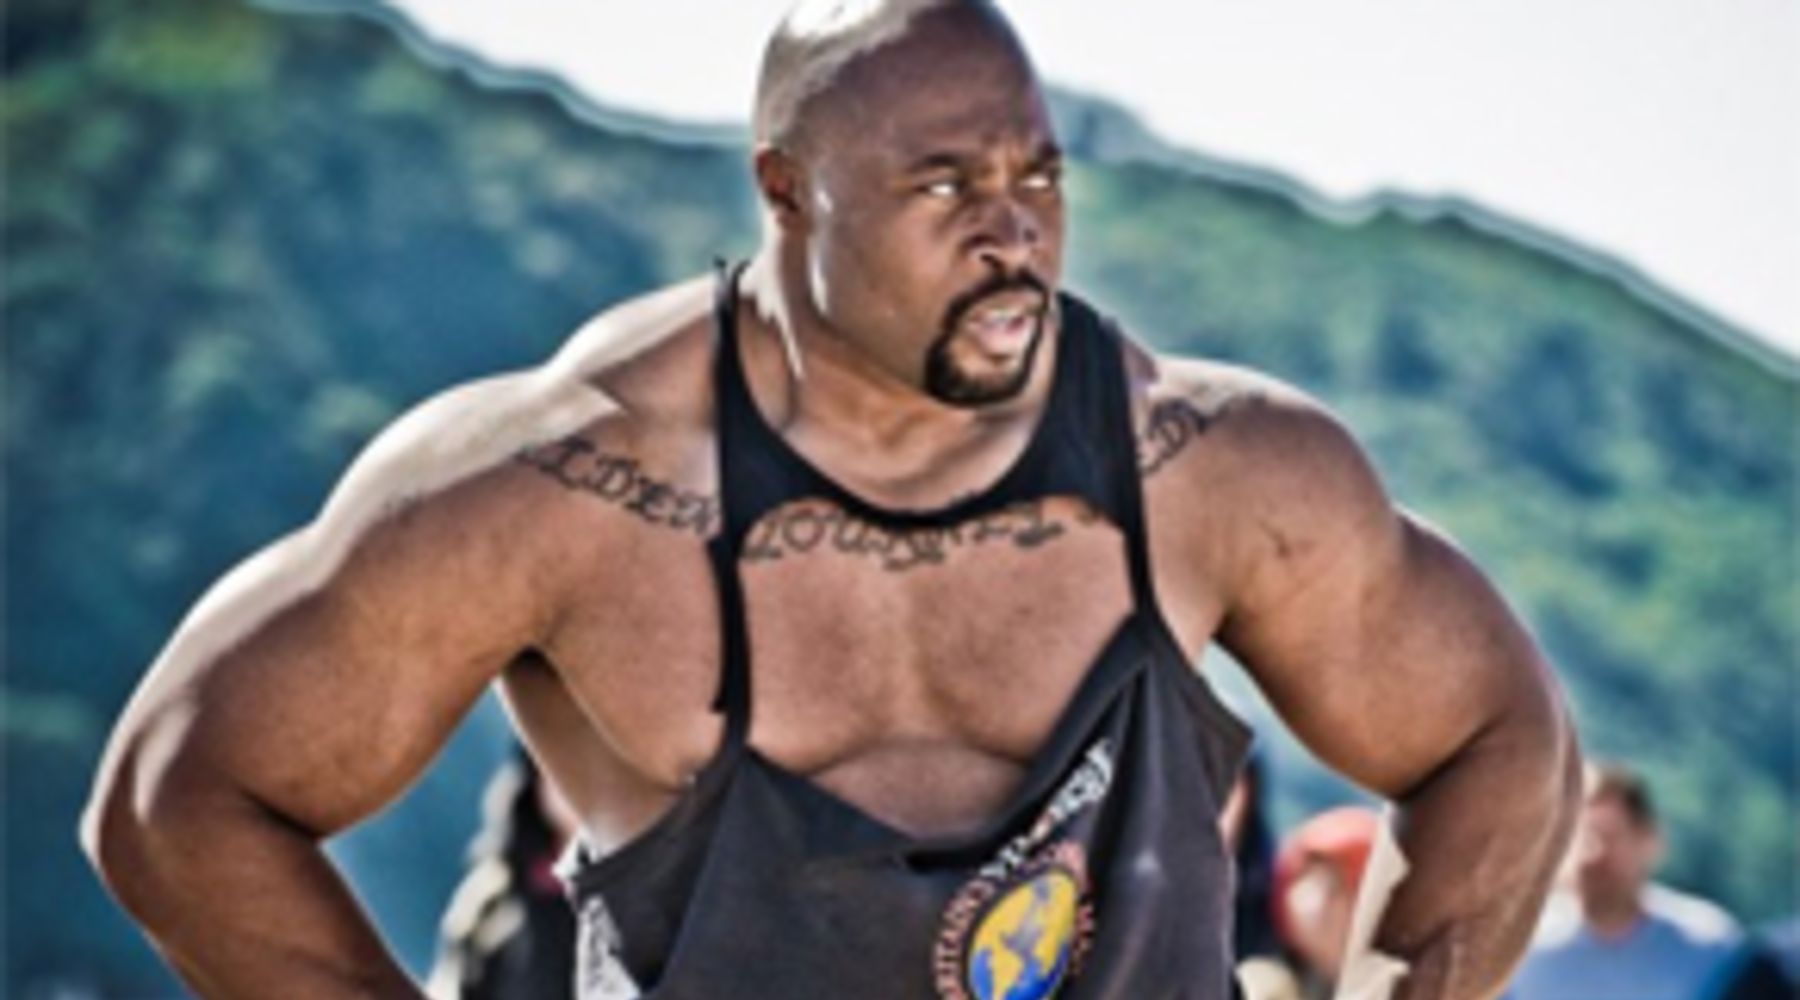 Meet Mark Felix, the 57-year-old World's Strongest Man competitor who fans  joke will still be competing in 2035